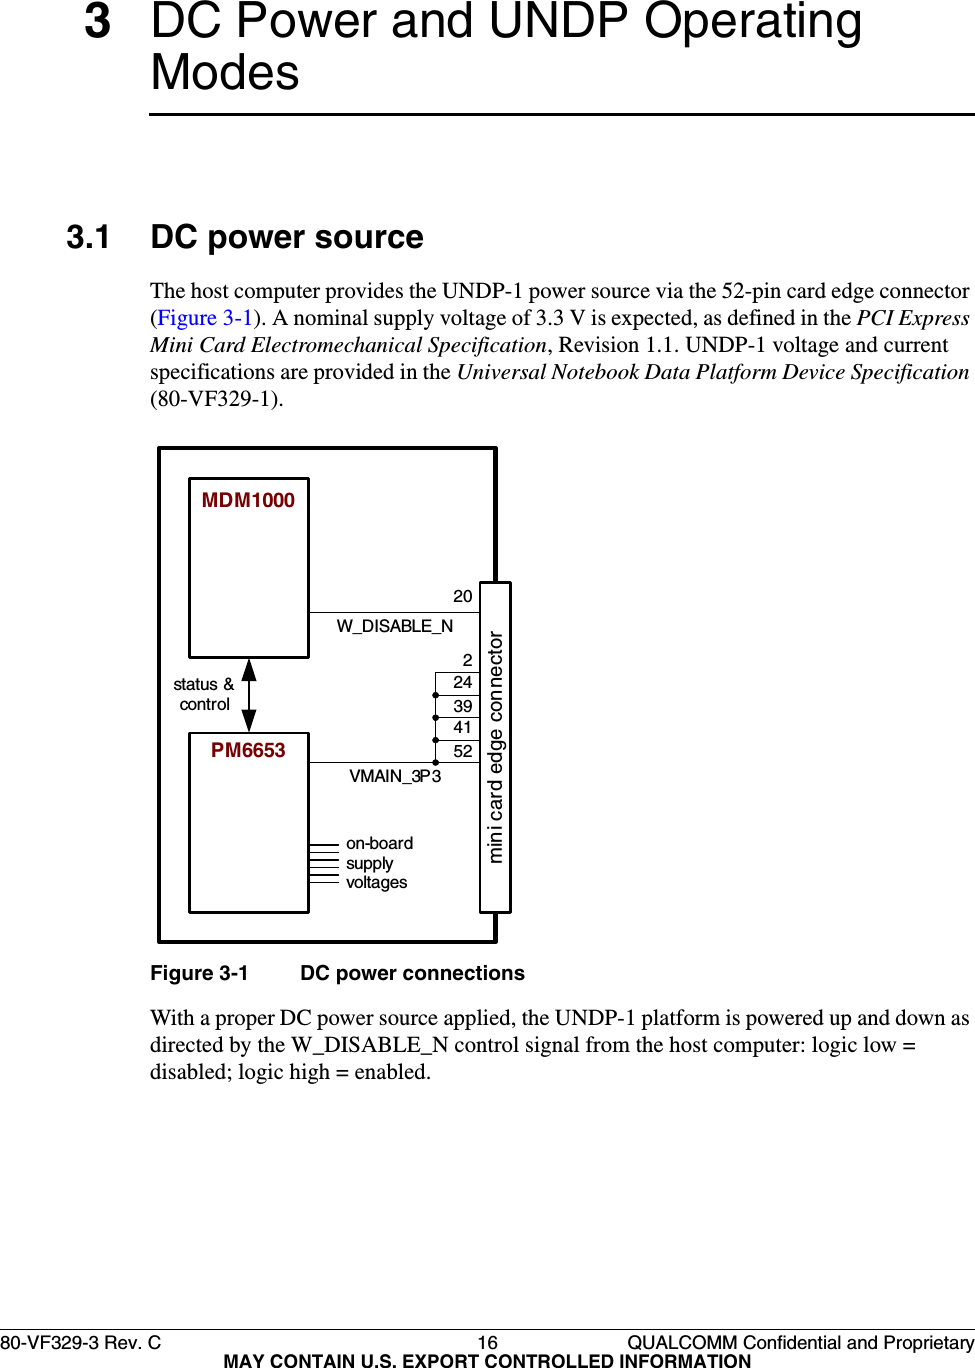 80-VF329-3 Rev. C 16 QUALCOMM Confidential and ProprietaryMAY CONTAIN U.S. EXPORT CONTROLLED INFORMATION3DC Power and UNDP Operating Modes3.1 DC power sourceThe host computer provides the UNDP-1 power source via the 52-pin card edge connector (Figure 3-1). A nominal supply voltage of 3.3 V is expected, as defined in the PCI Express Mini Card Electromechanical Specification, Revision 1.1. UNDP-1 voltage and current specifications are provided in the Universal Notebook Data Platform Device Specification (80-VF329-1).Figure 3-1 DC power connectionsWith a proper DC power source applied, the UNDP-1 platform is powered up and down as directed by the W_DISABLE_N control signal from the host computer: logic low = disabled; logic high = enabled.MDM1000PM6653status &amp; controlon-board supply voltagesVMAIN_3P3mini card edge connectorW_DISABLE_N20524139242